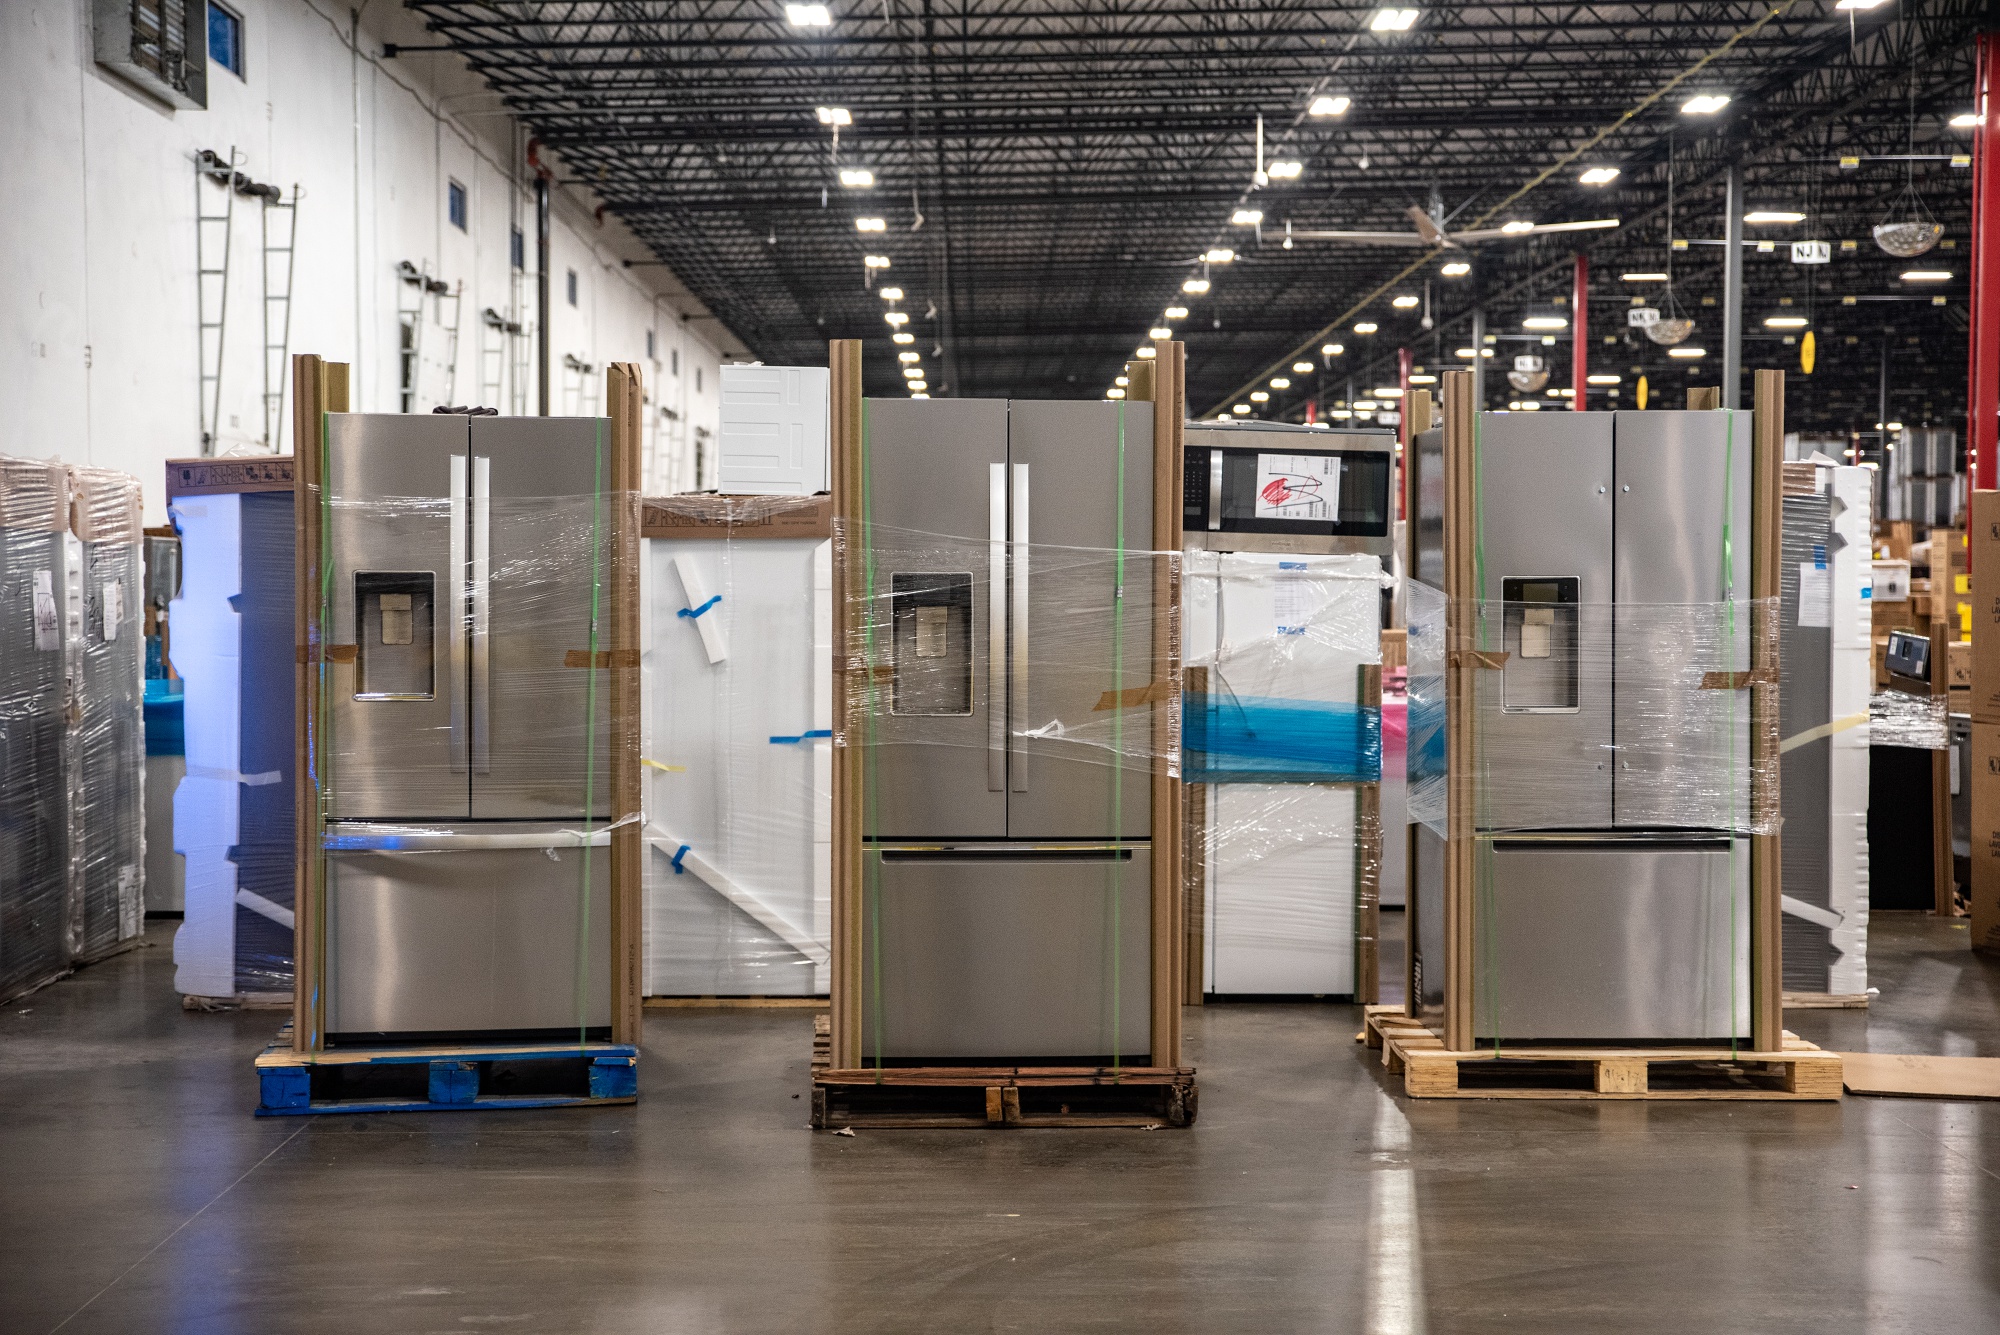 Whirlpool&nbsp;refrigerators at a distribution center in Texas.